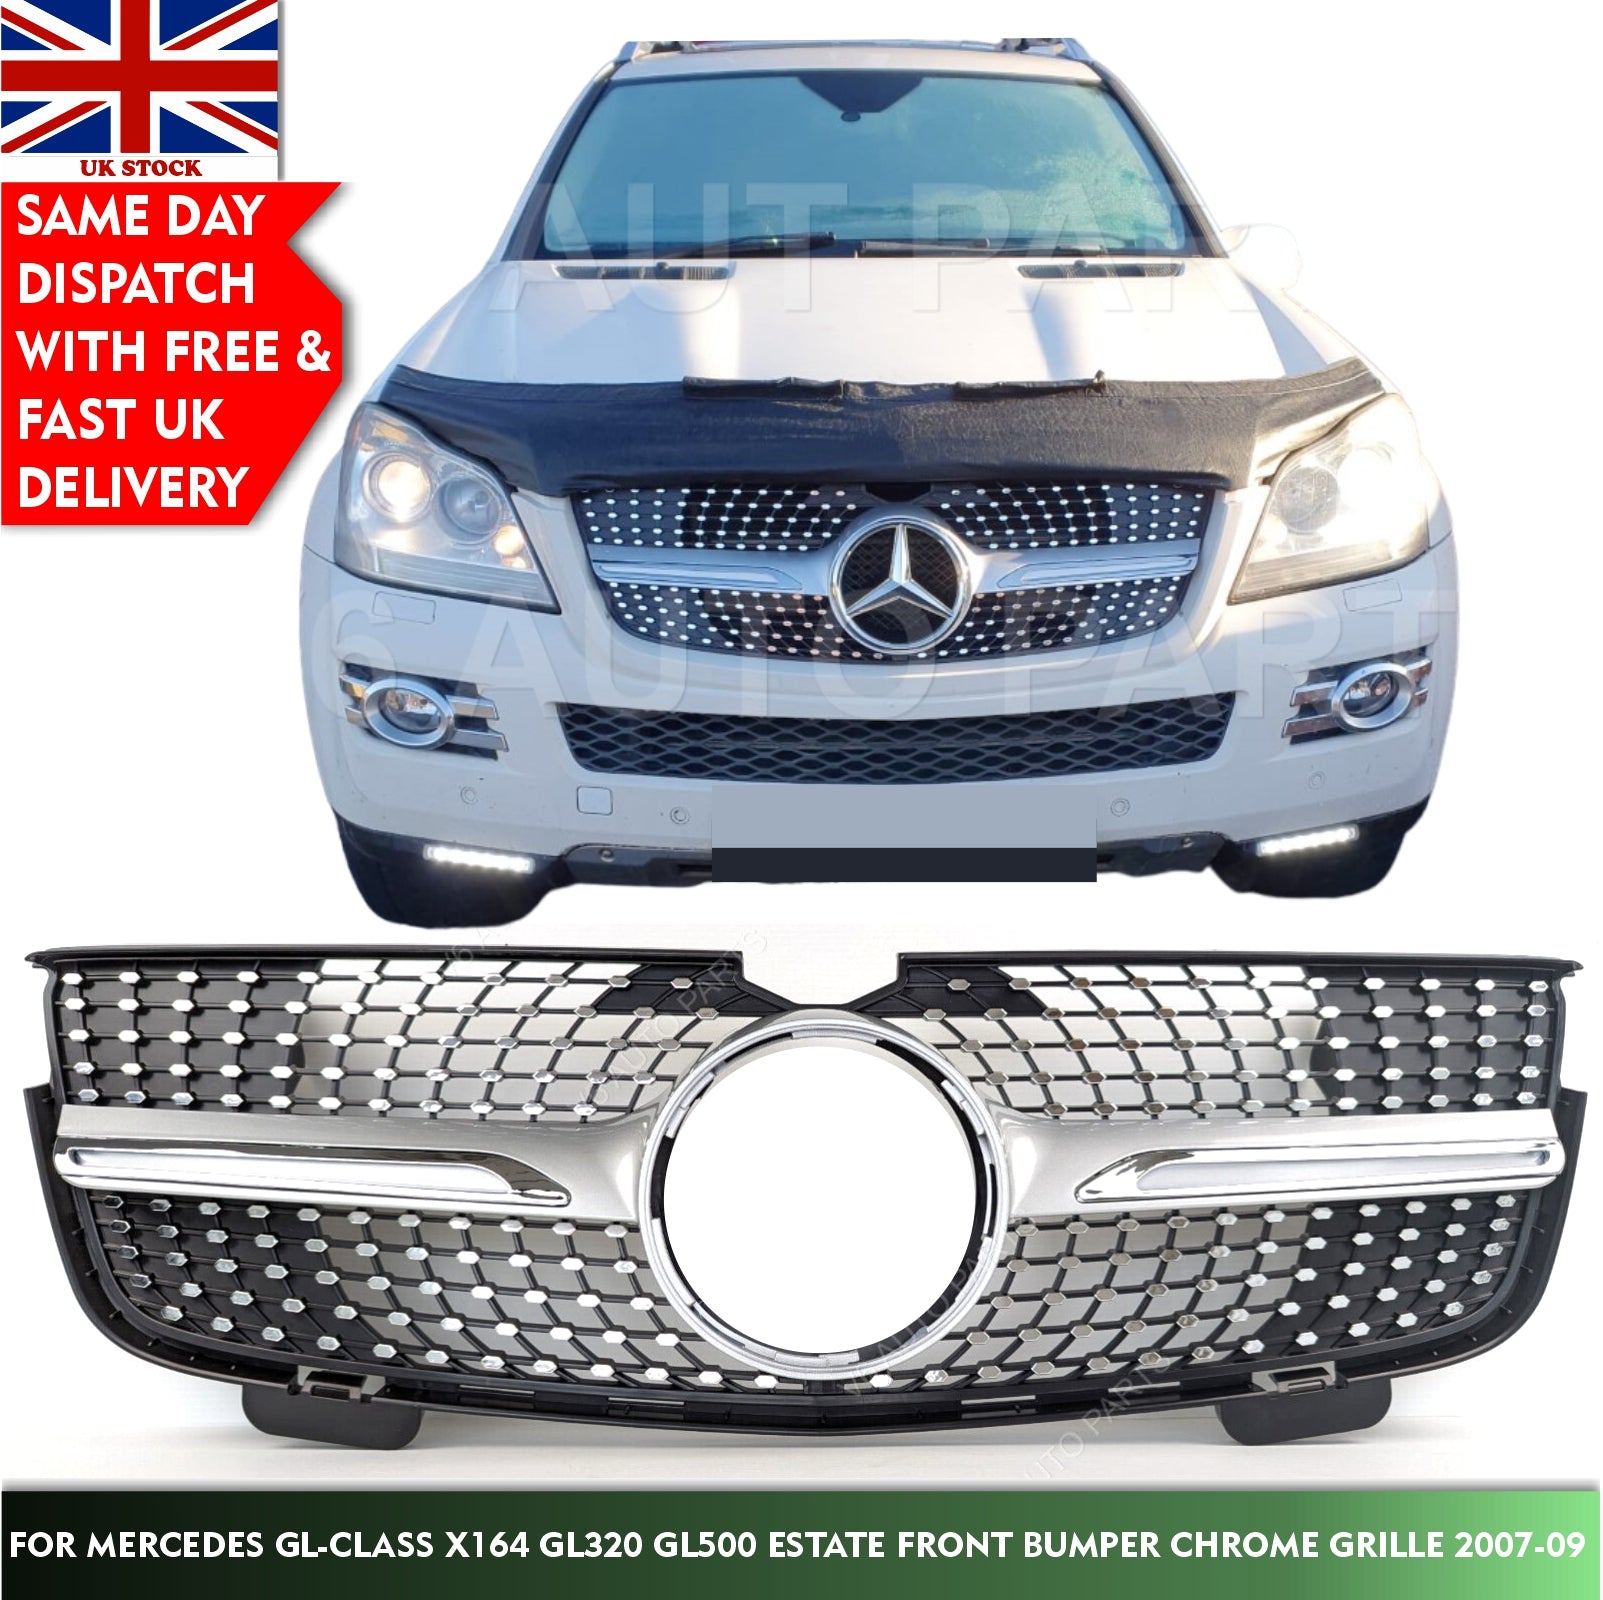 For Mercedes GL-Class X164 GL450 GL320 Front Radiator Grille 2007-2009 Diamond